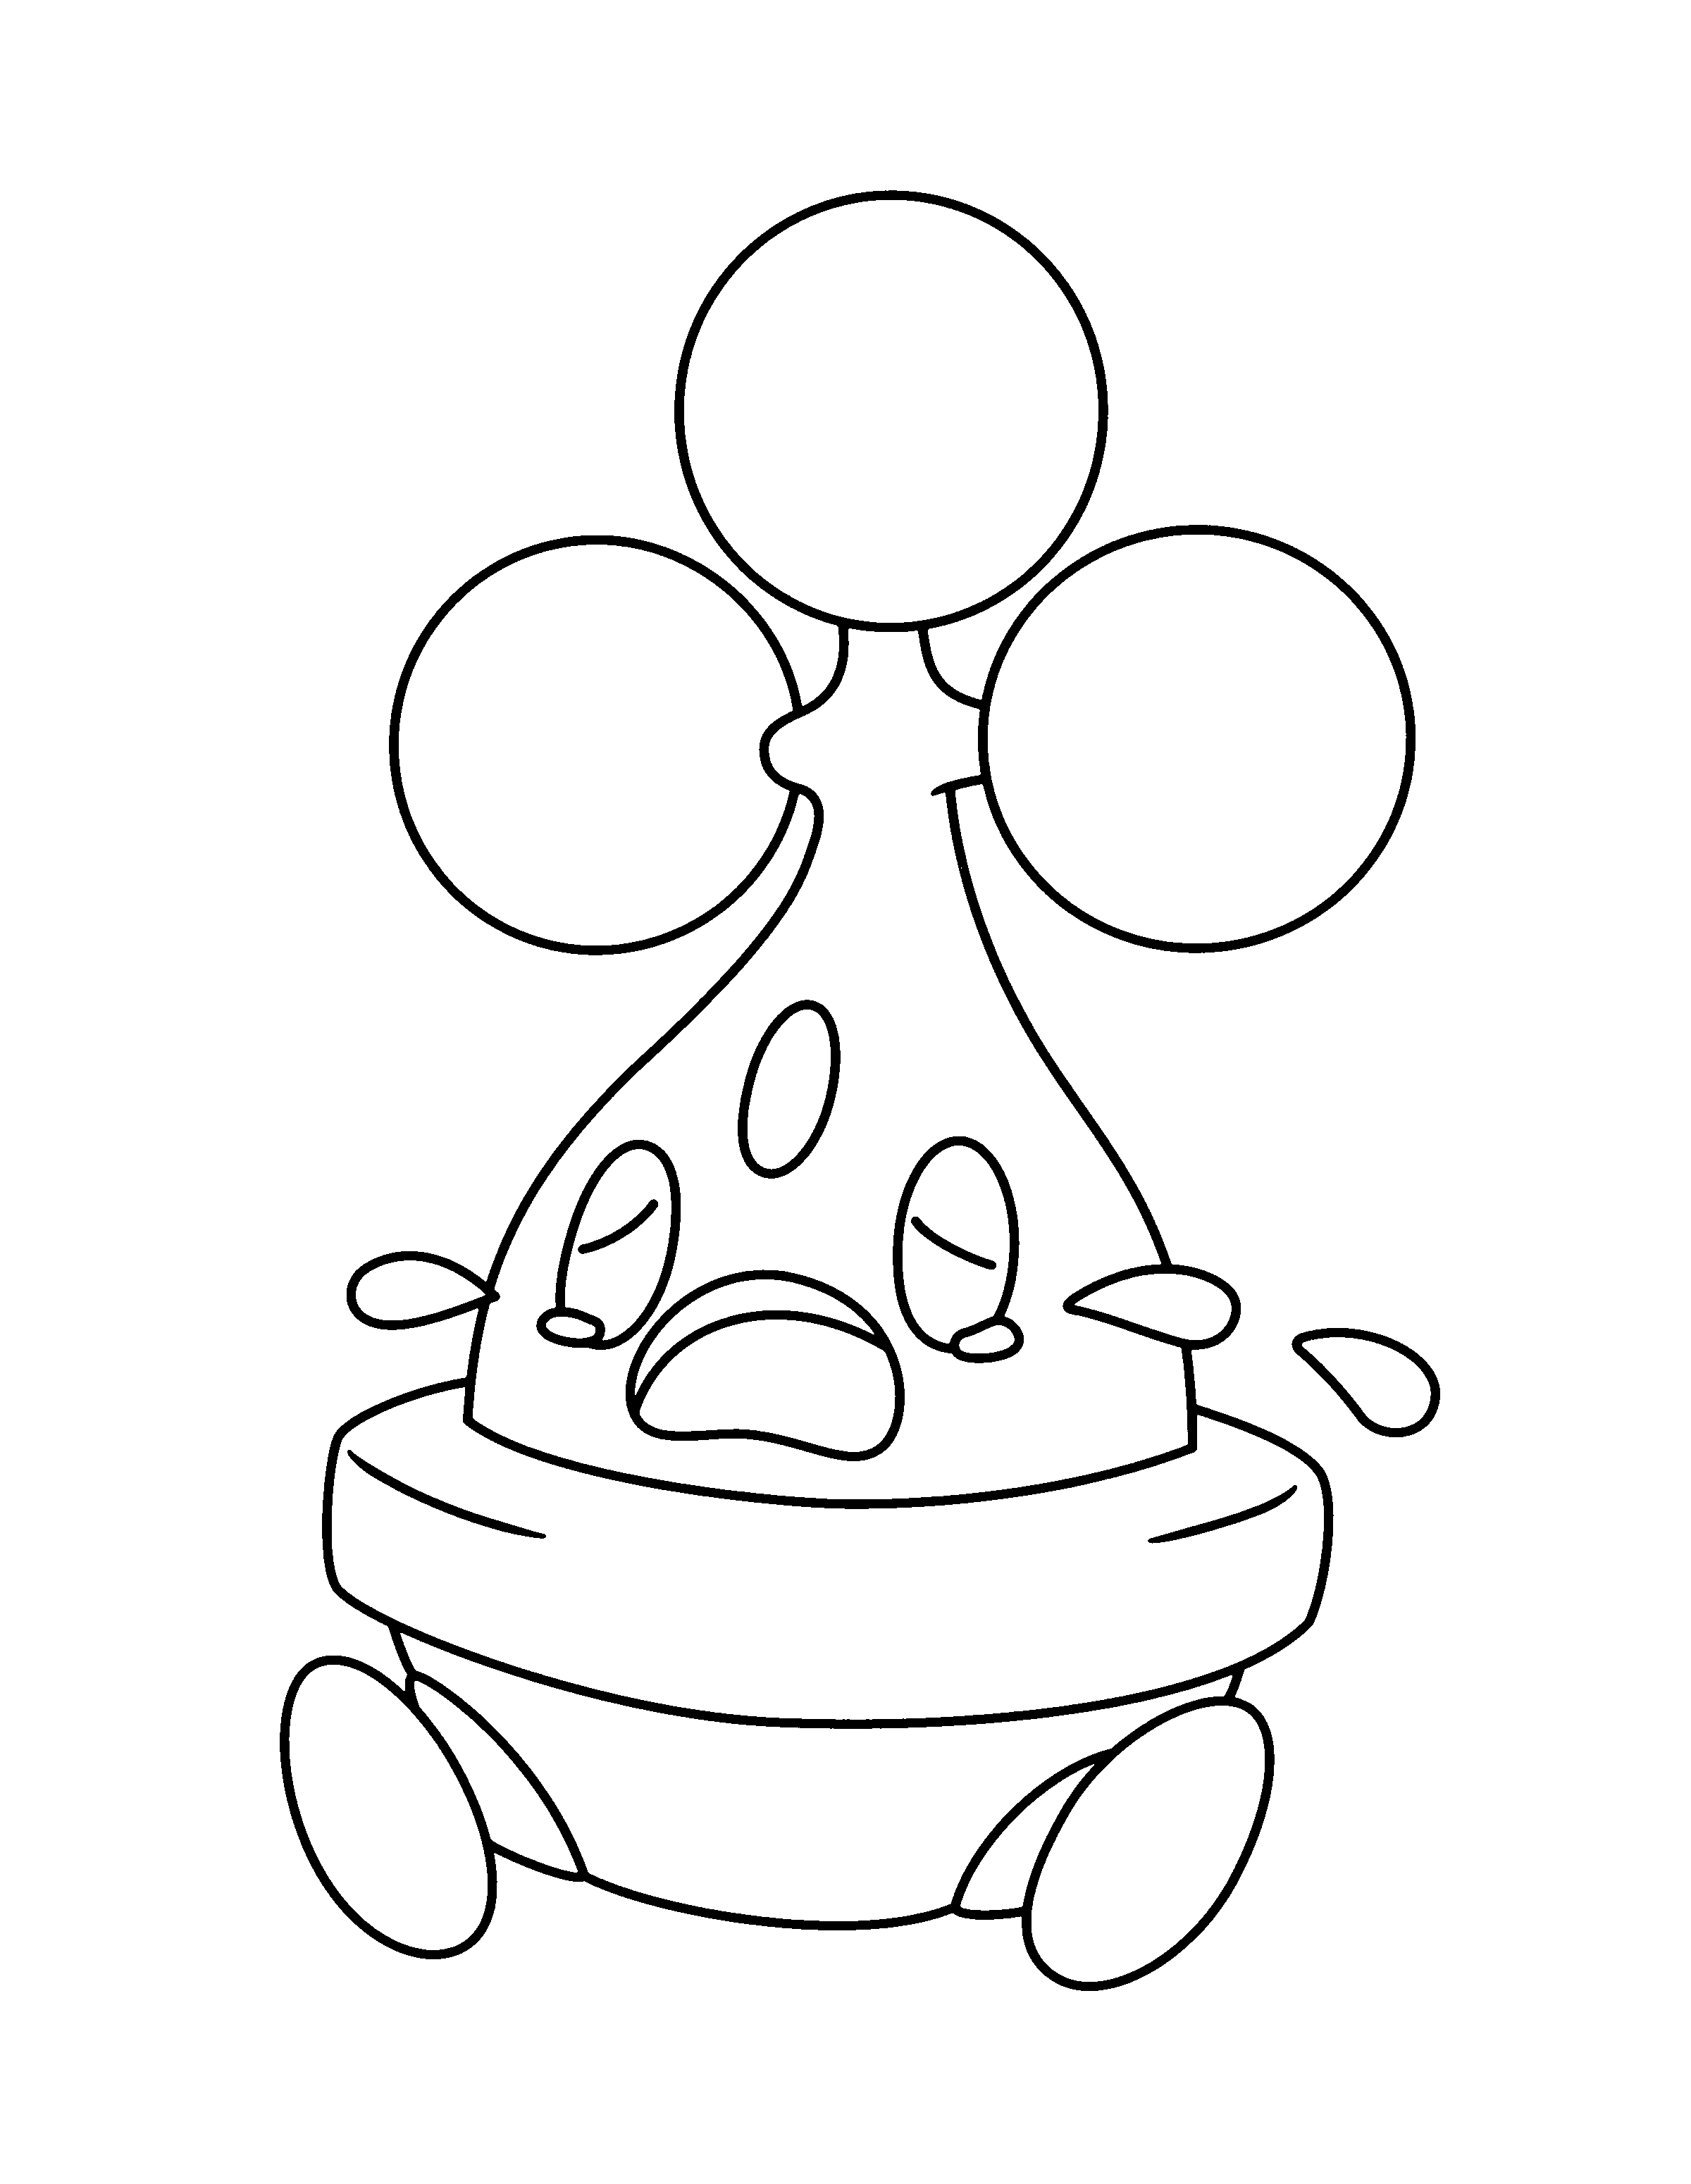 animated-coloring-pages-pokemon-image-0969